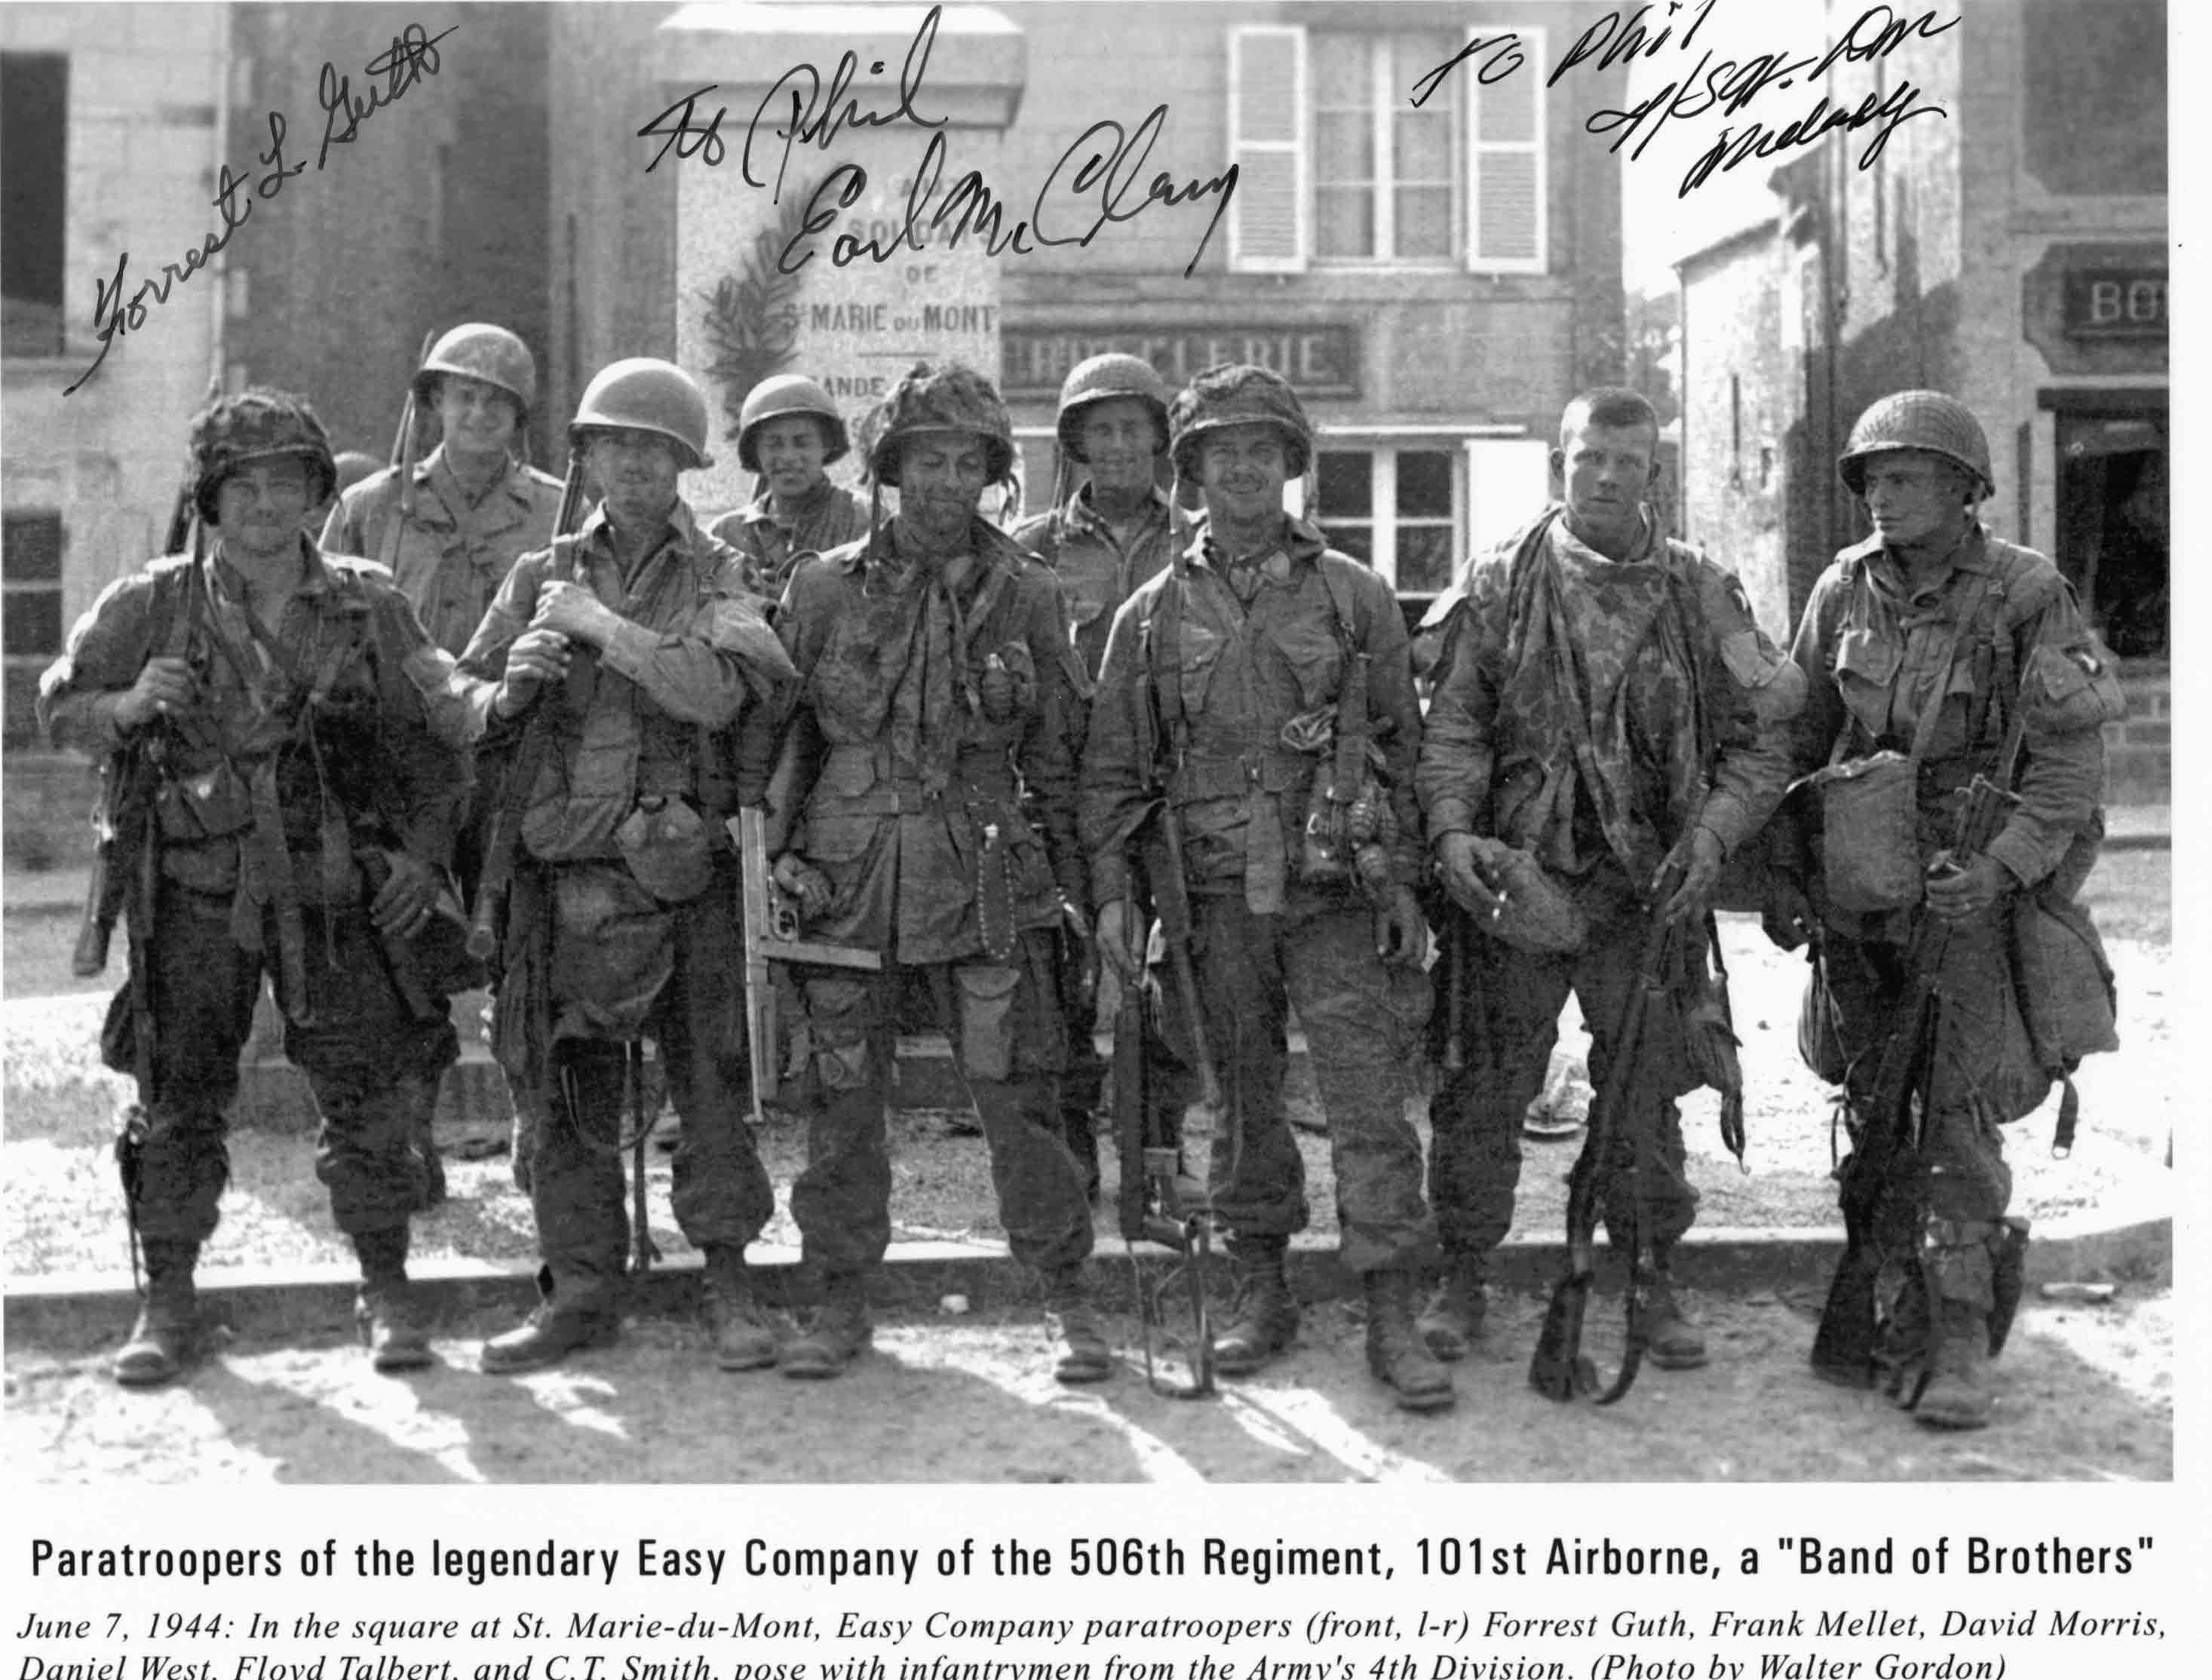 The Real Band of Brother from the 506th Regiment of the 101st Airborne, Easy Com